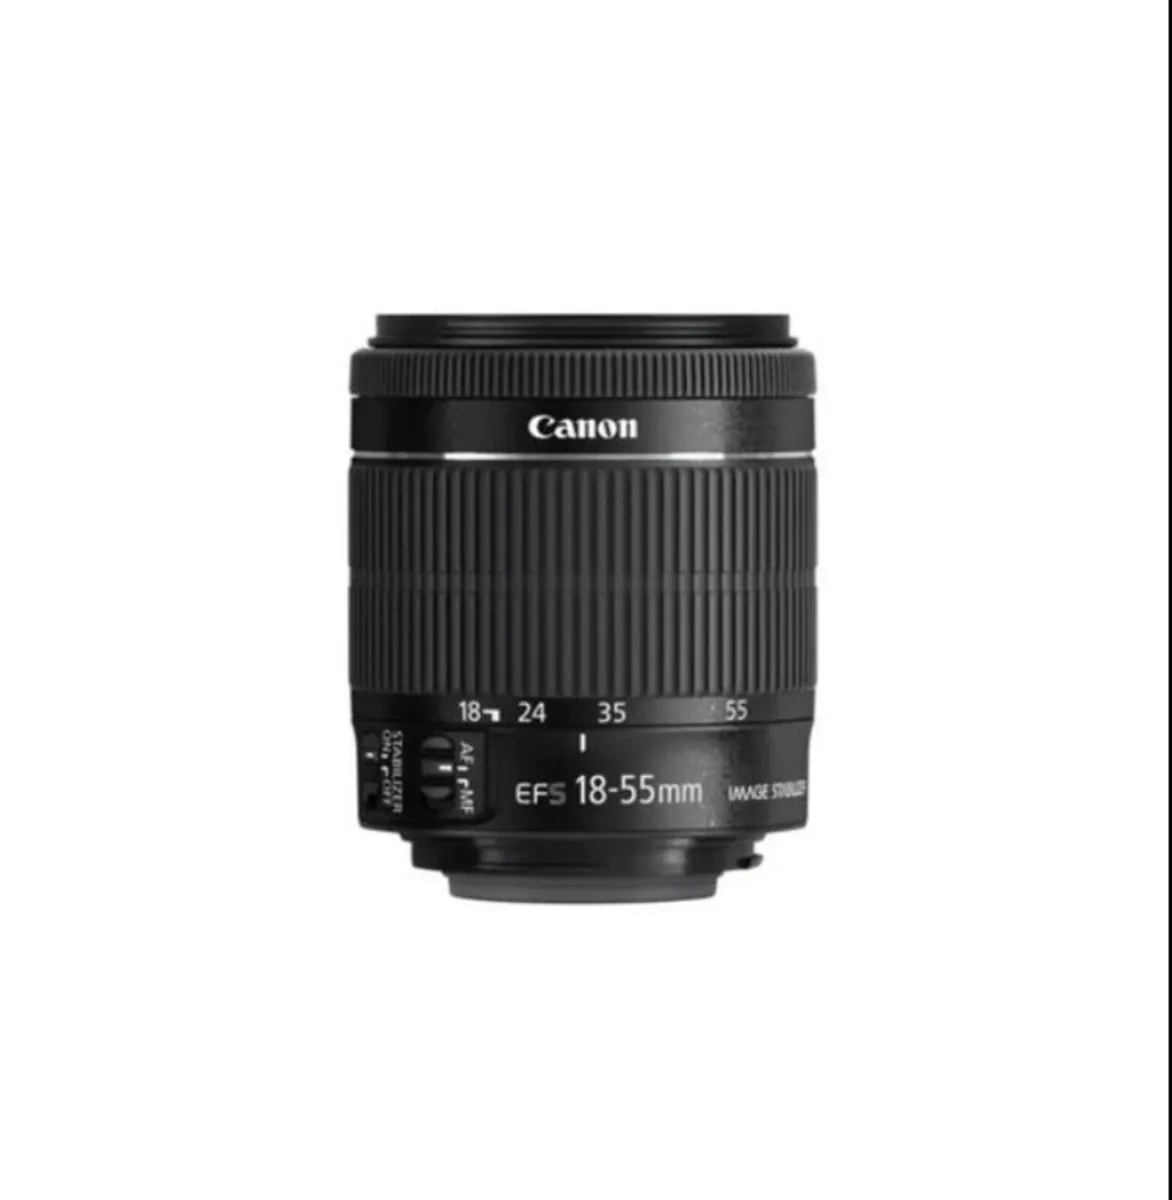 Brand new Canon Ef-s 18-55mm lens - Image 1